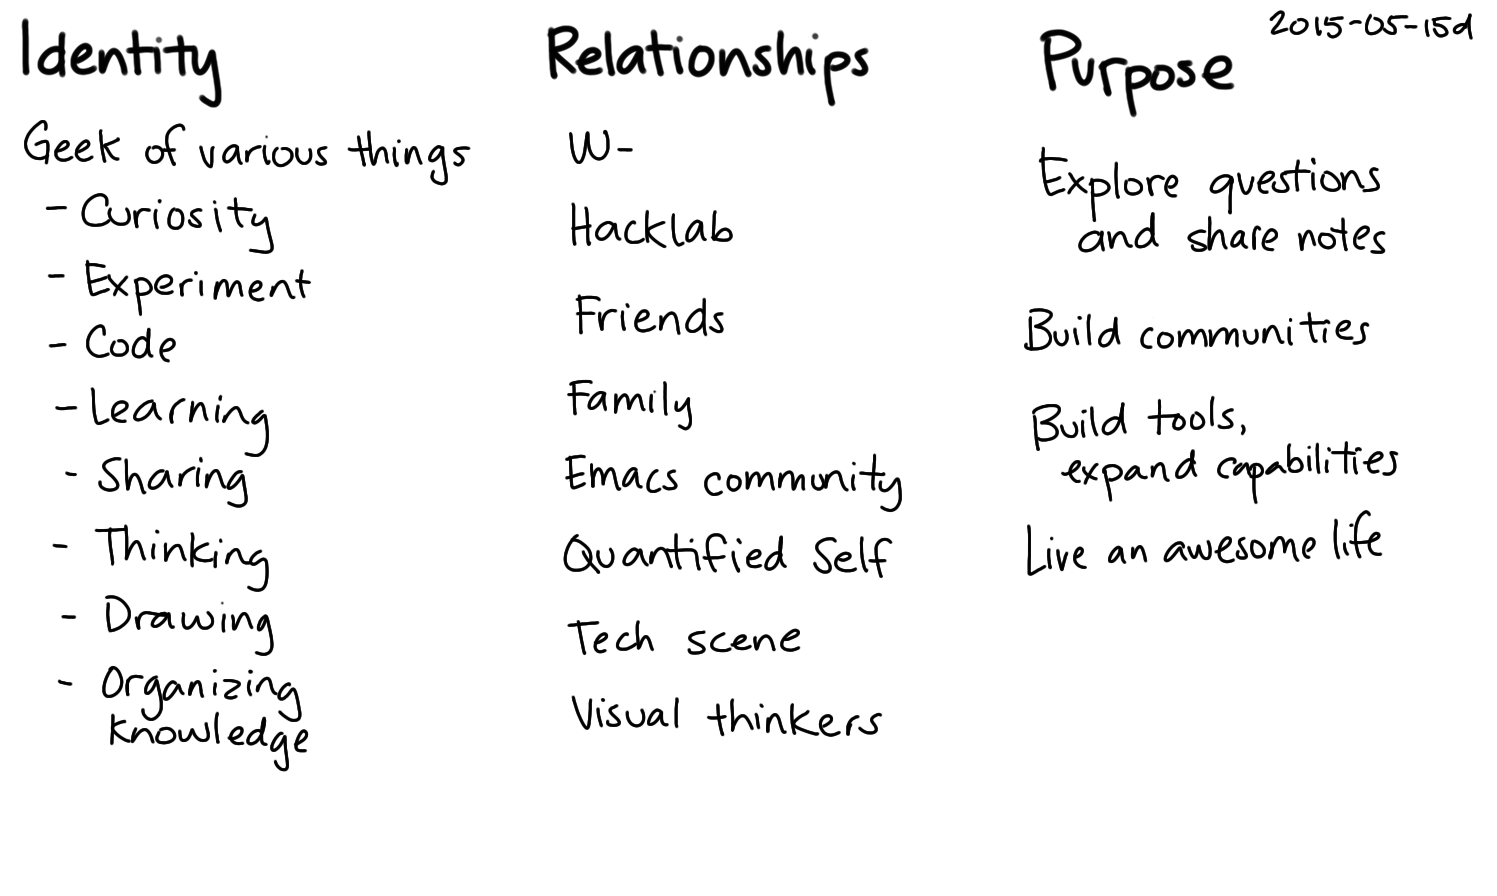 2015-05-15d Identity, relationships, purpose -- index card #identity.png